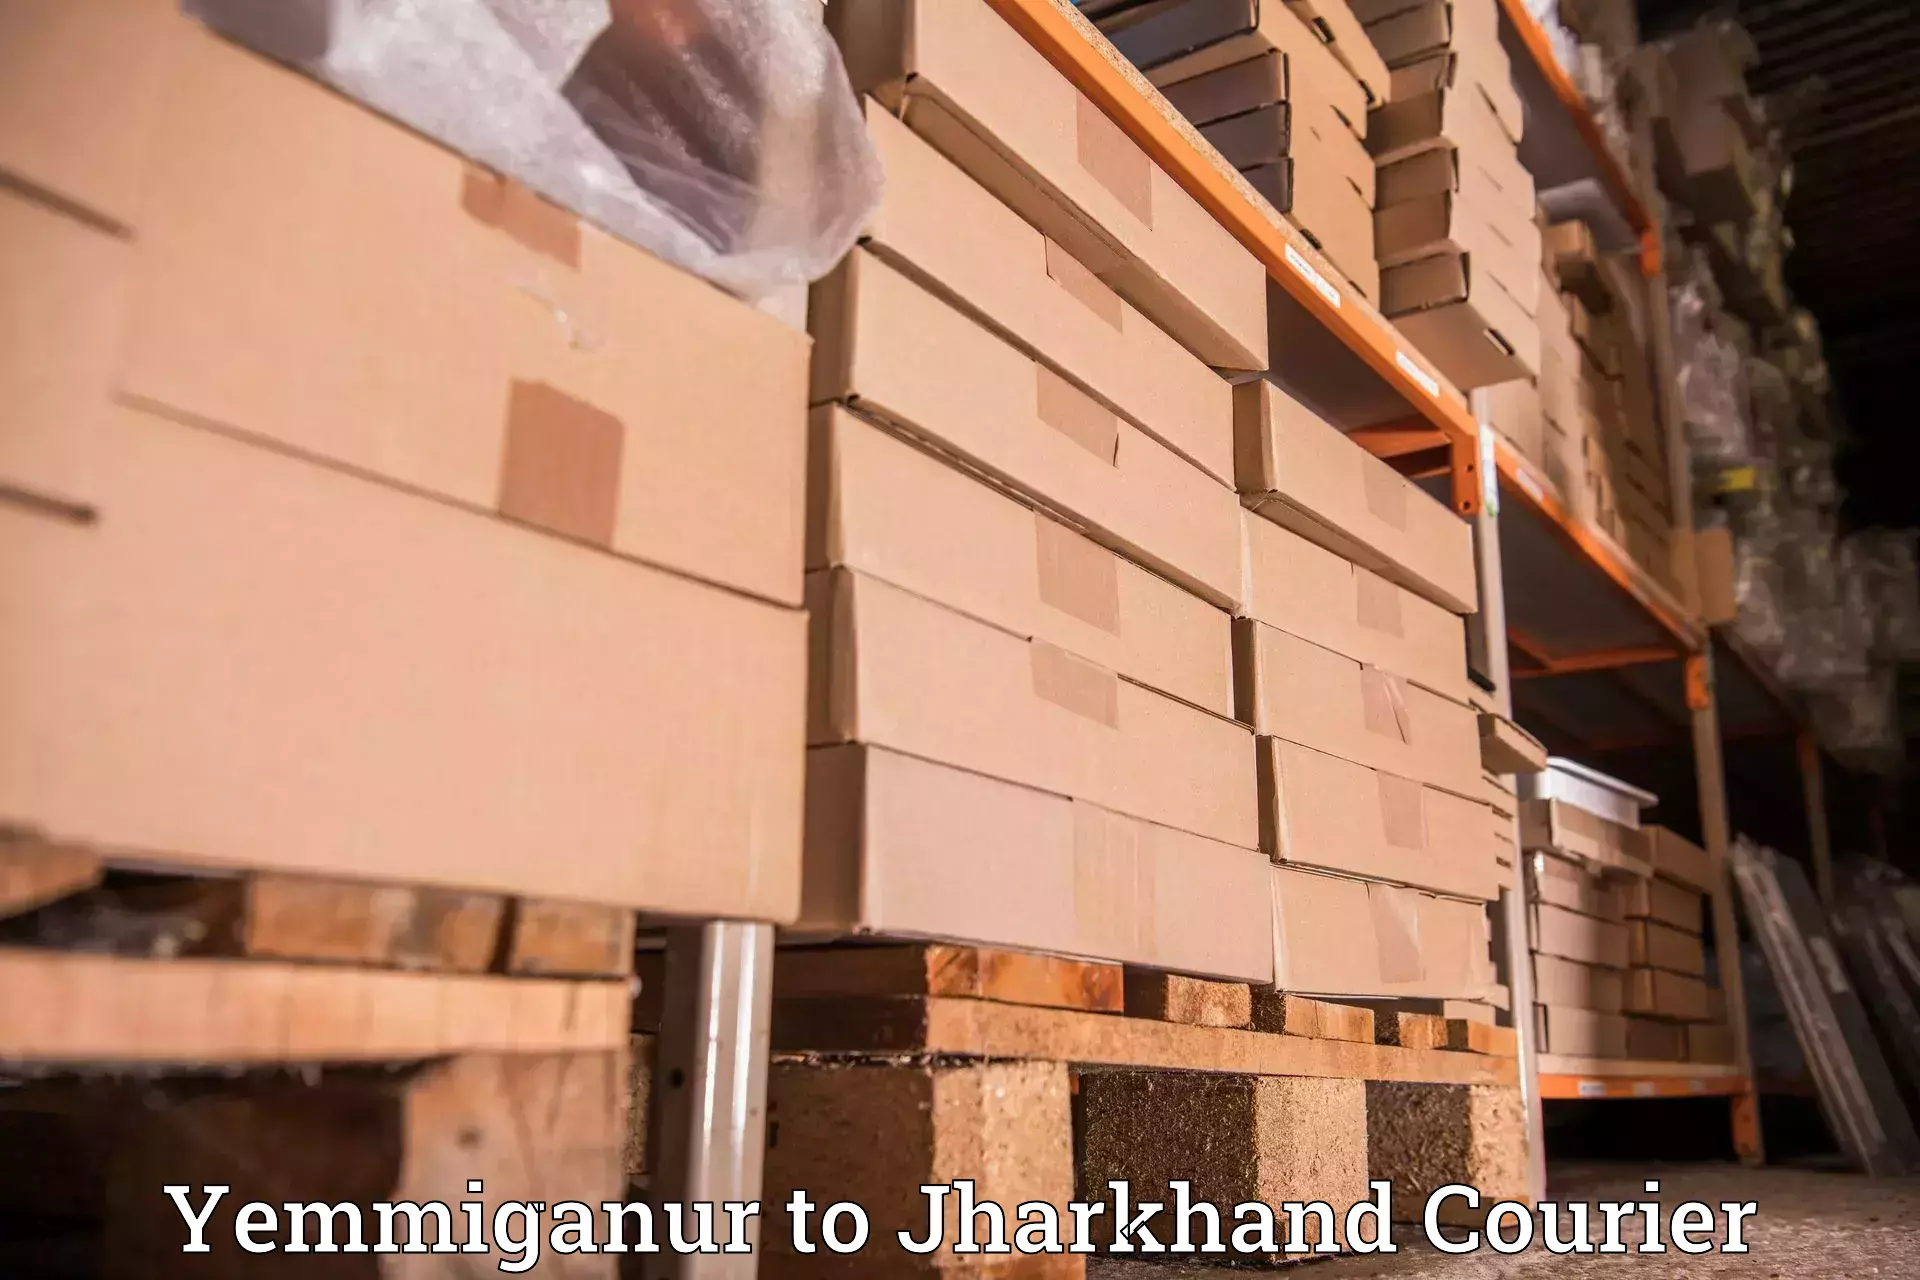 Global courier networks Yemmiganur to Jamshedpur